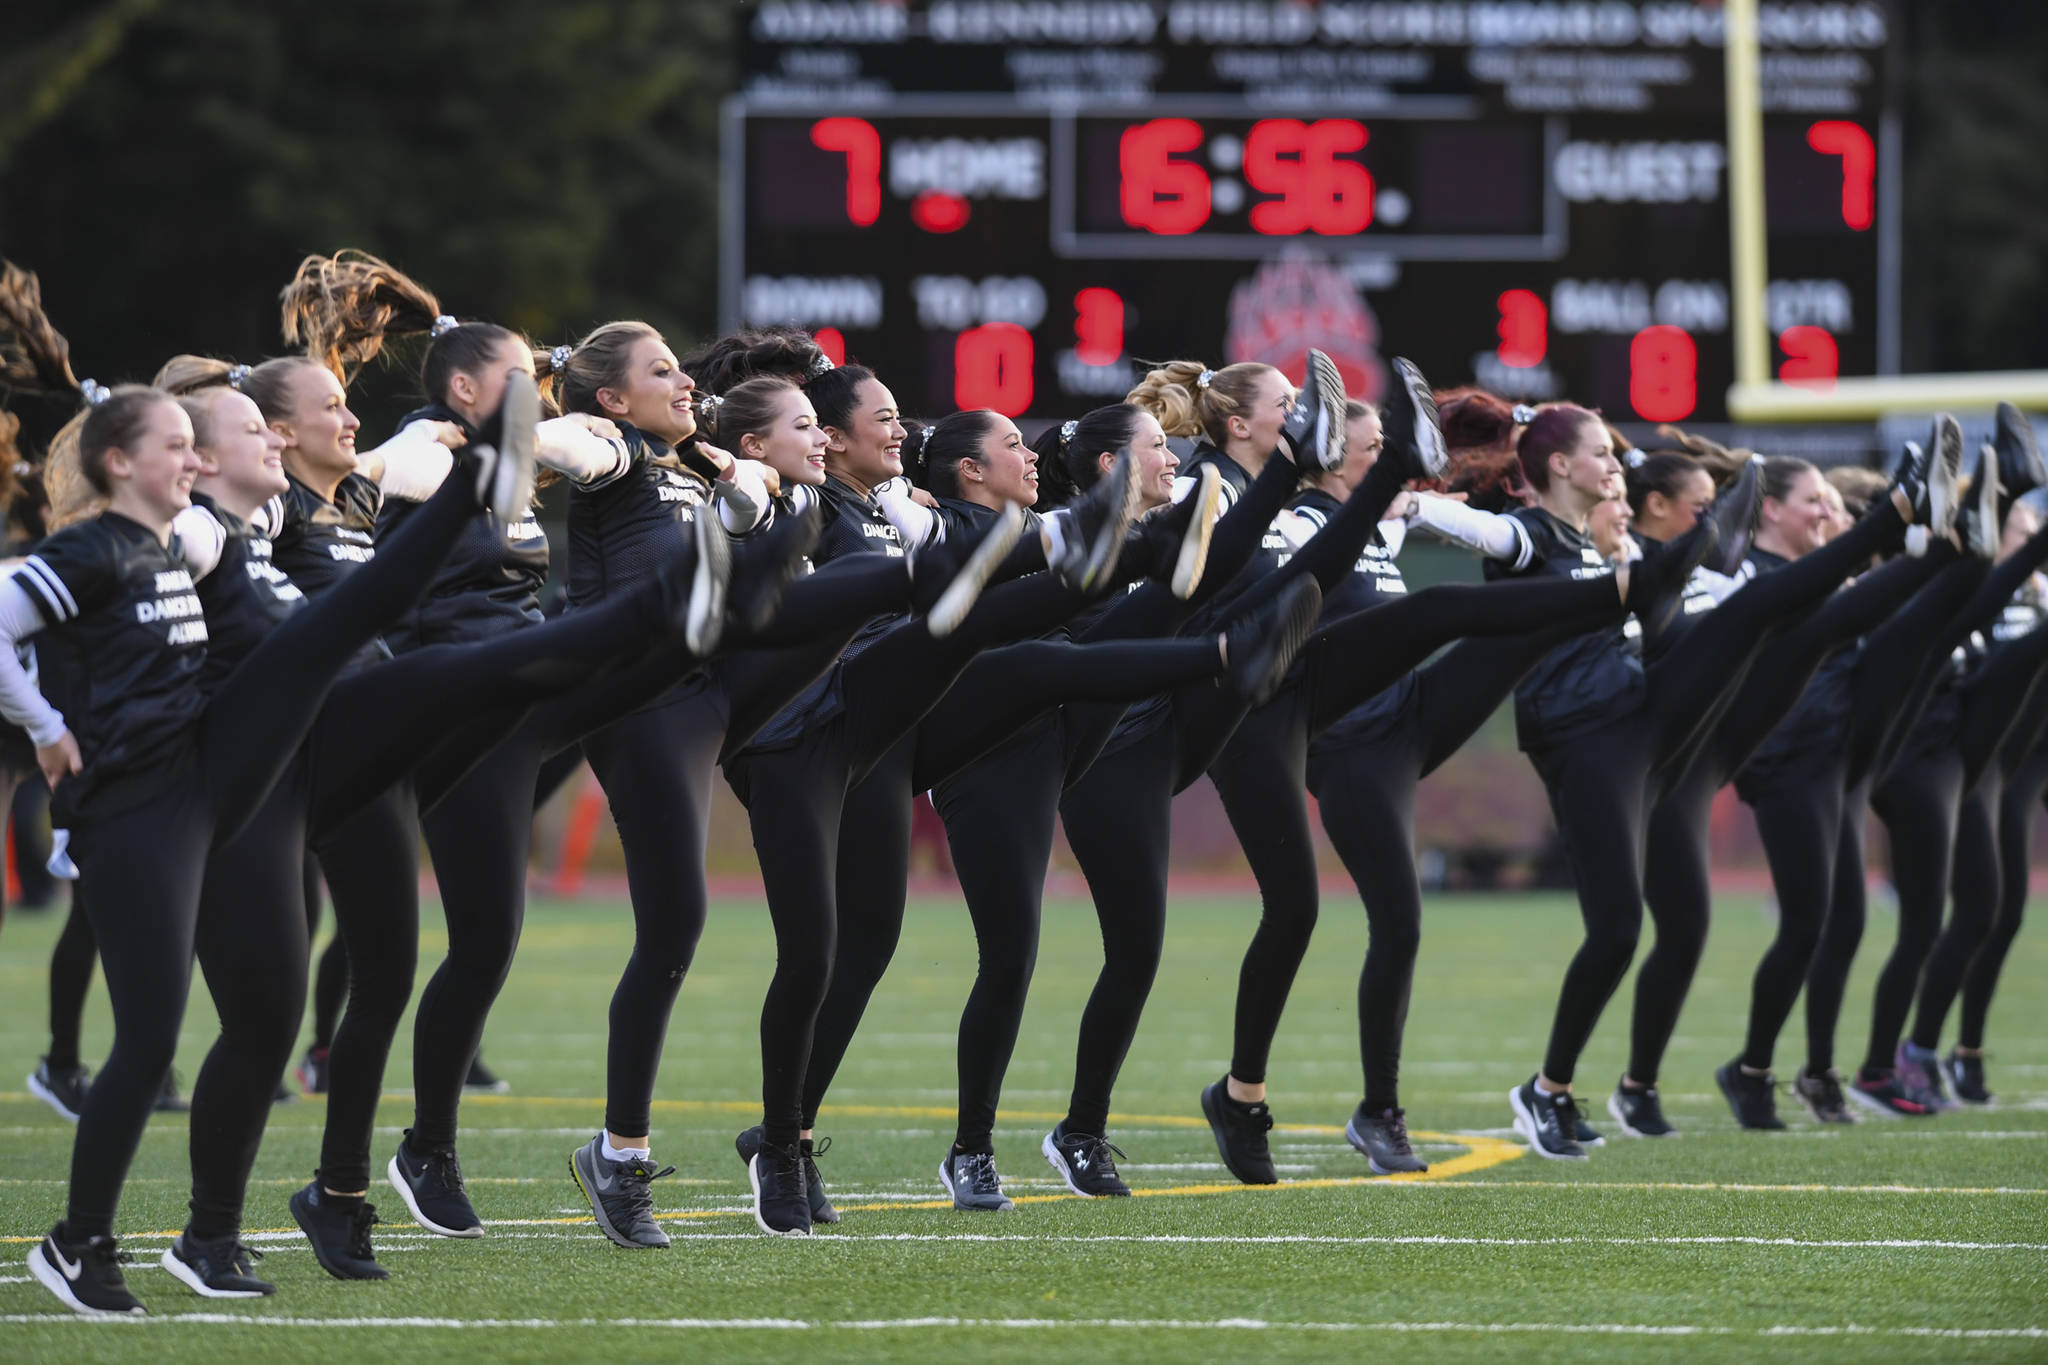 Members of the Juneau Alumni Dance Team perform during halftime of the 1st annual Juneau Alumni Football Game with football players, dance team members and cheerleaders from Juneau-Douglas and Thunder Mountain High Schools at Adair-Kennedy Memorial Field on Friday, May 24, 2019. (Michael Penn | Juneau Empire)